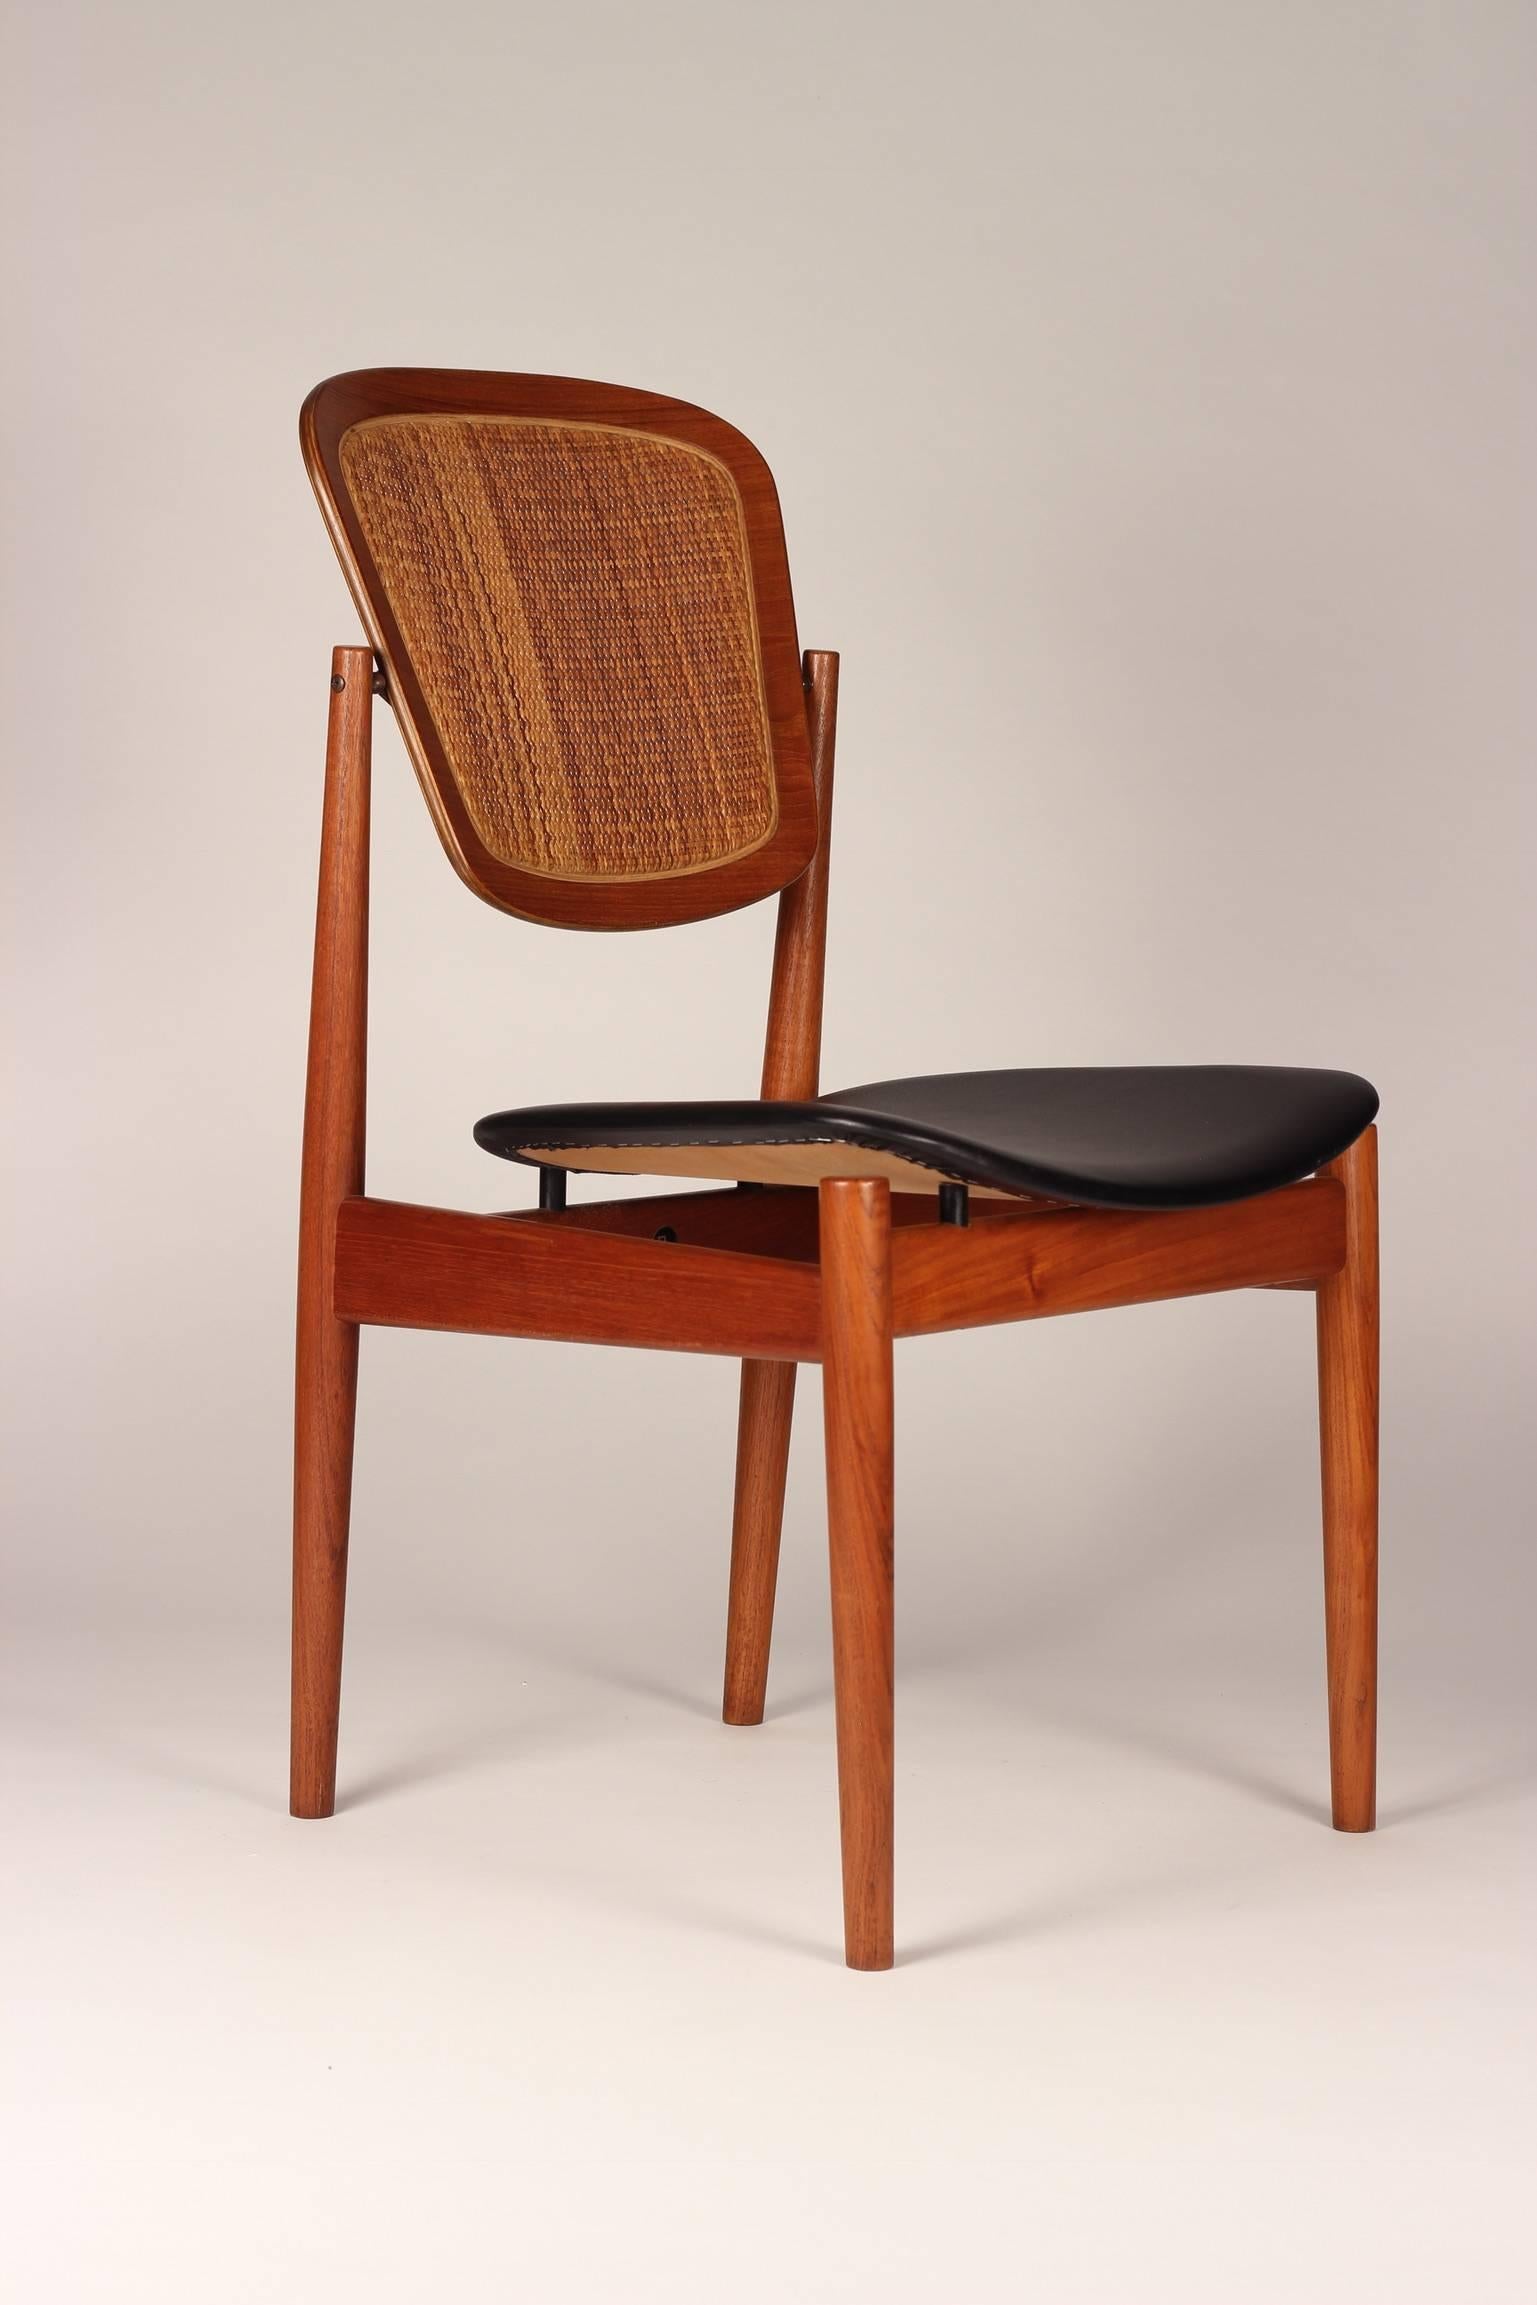 Danish Desk Chair by Arne Vodder in Teak, Cane and Black Leather 1